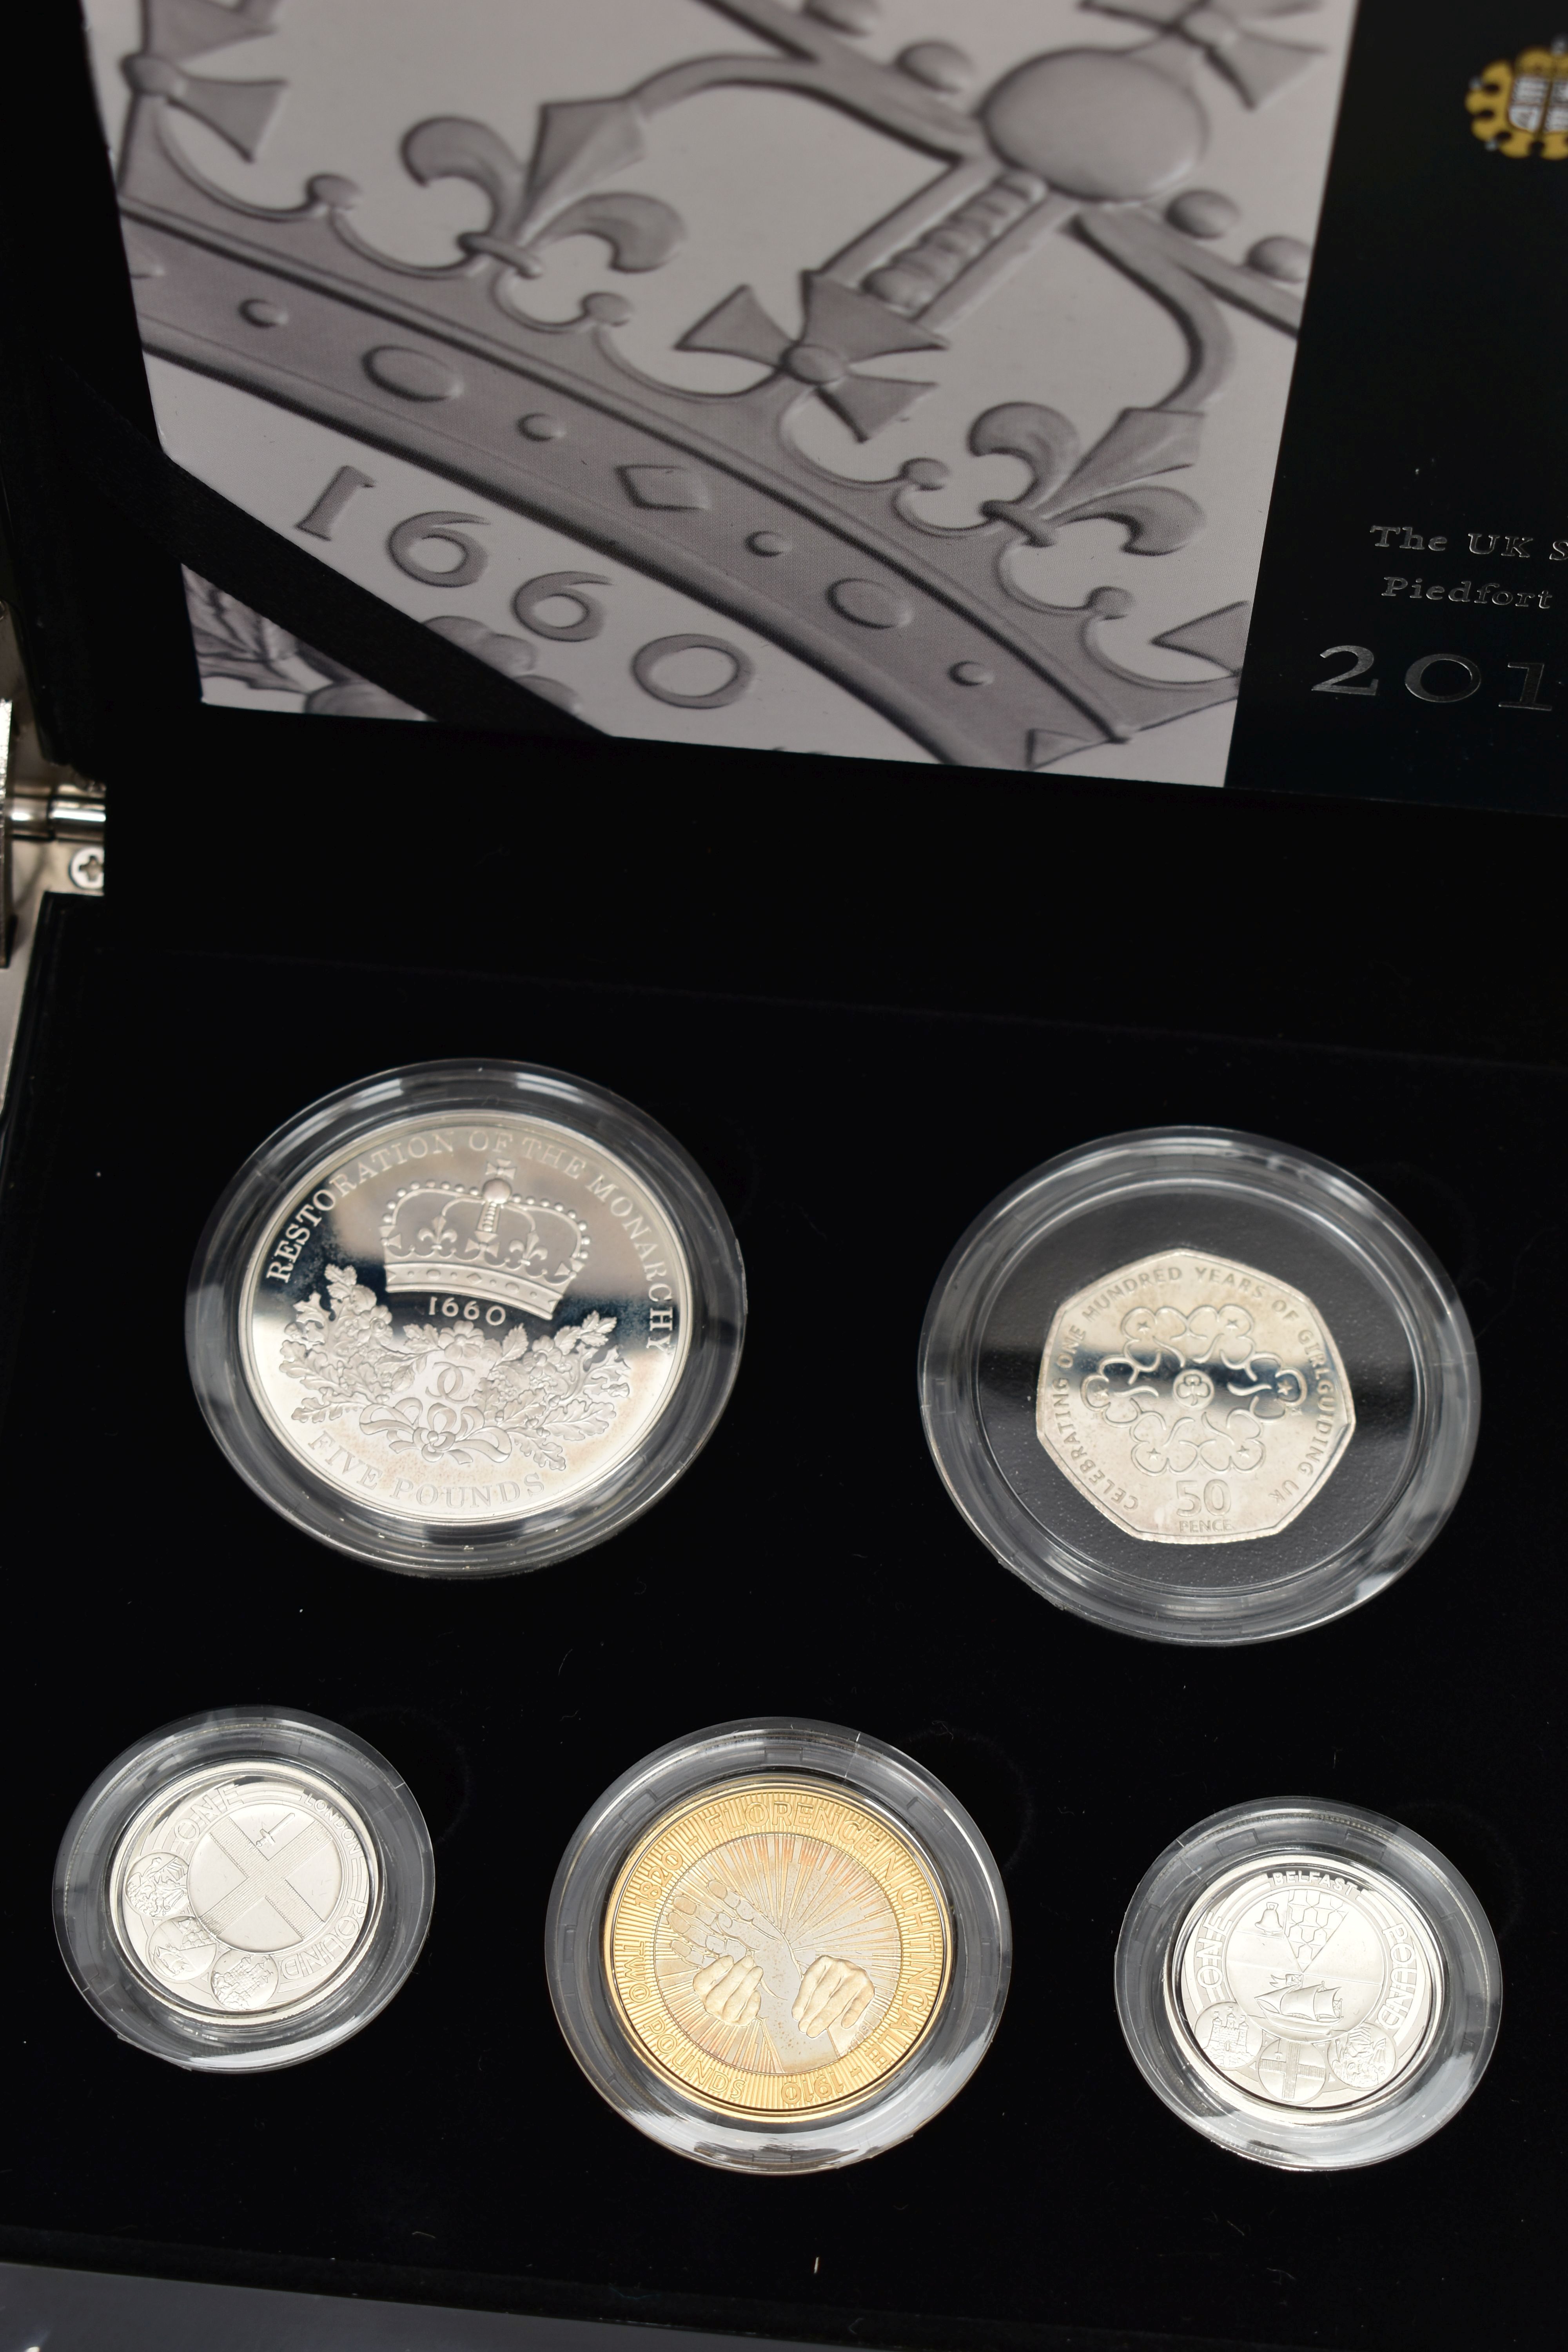 ROYAL MINT ELIZABETH II 2010, 2011, UK SILVER PROOF PIEDFORT COLLECTIONS, 2010 set is a £5 con - Image 5 of 5